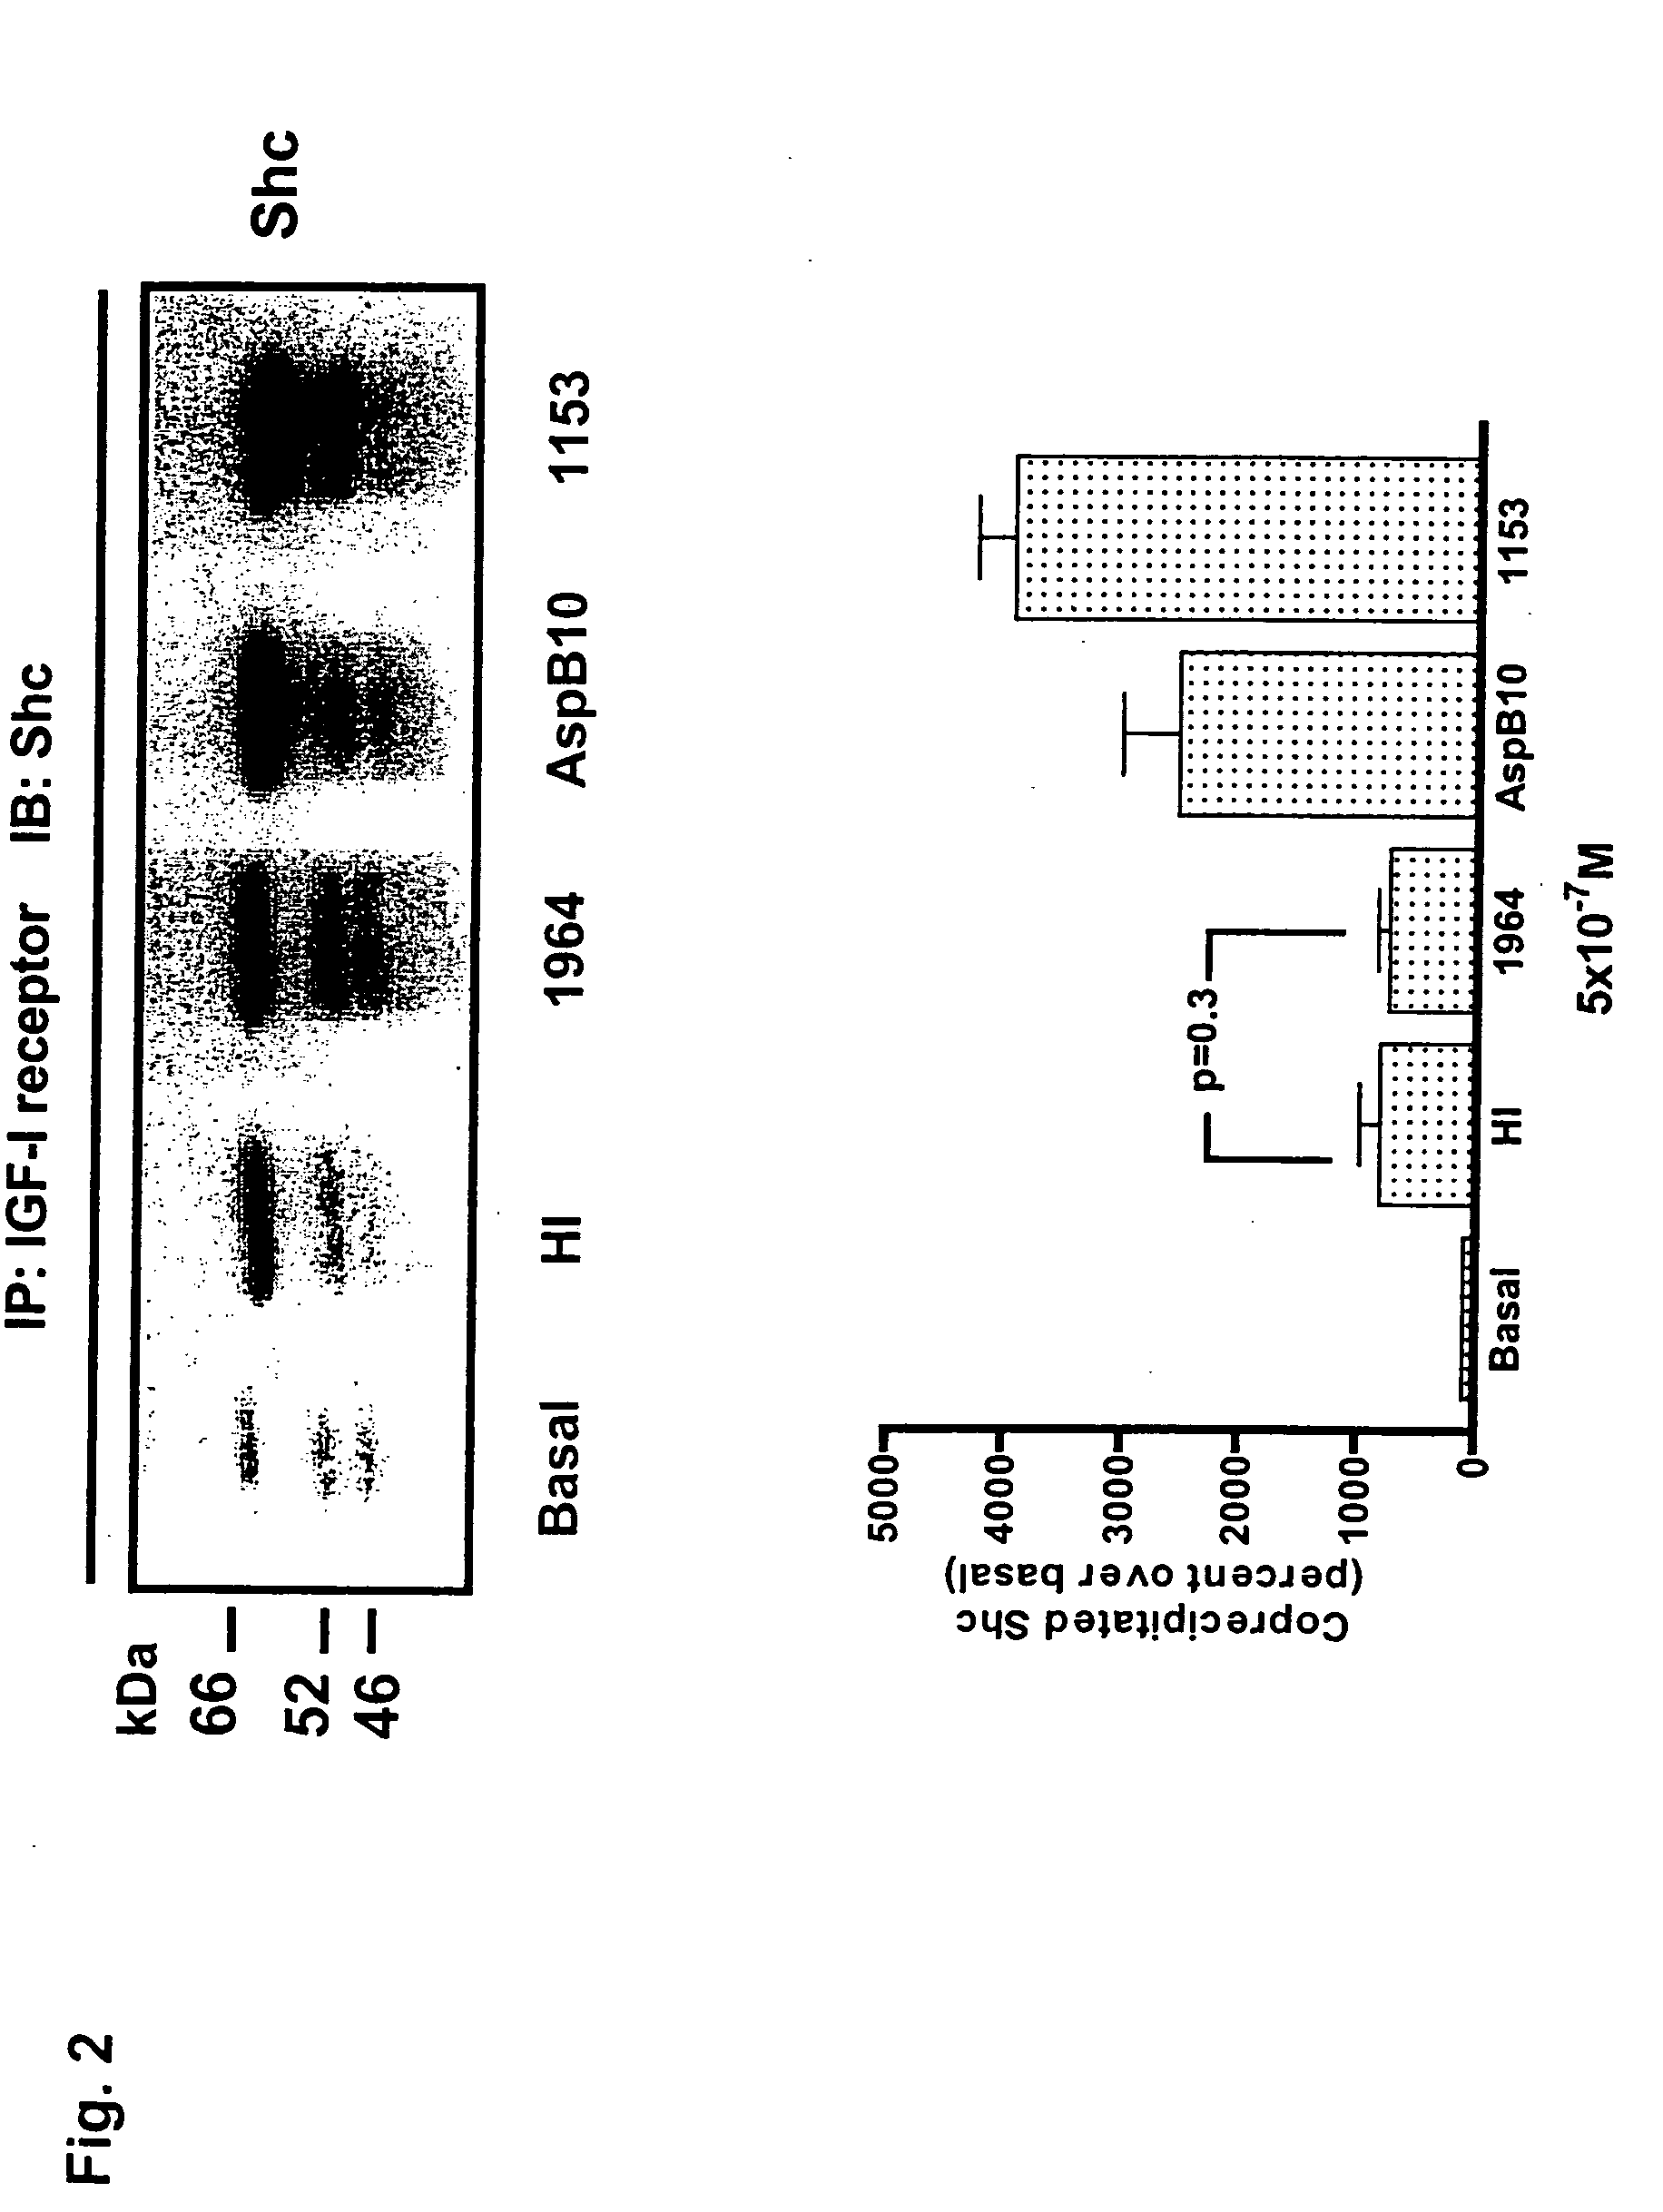 Method of activating insulin receptor substrate-2 to stimulate insulin production